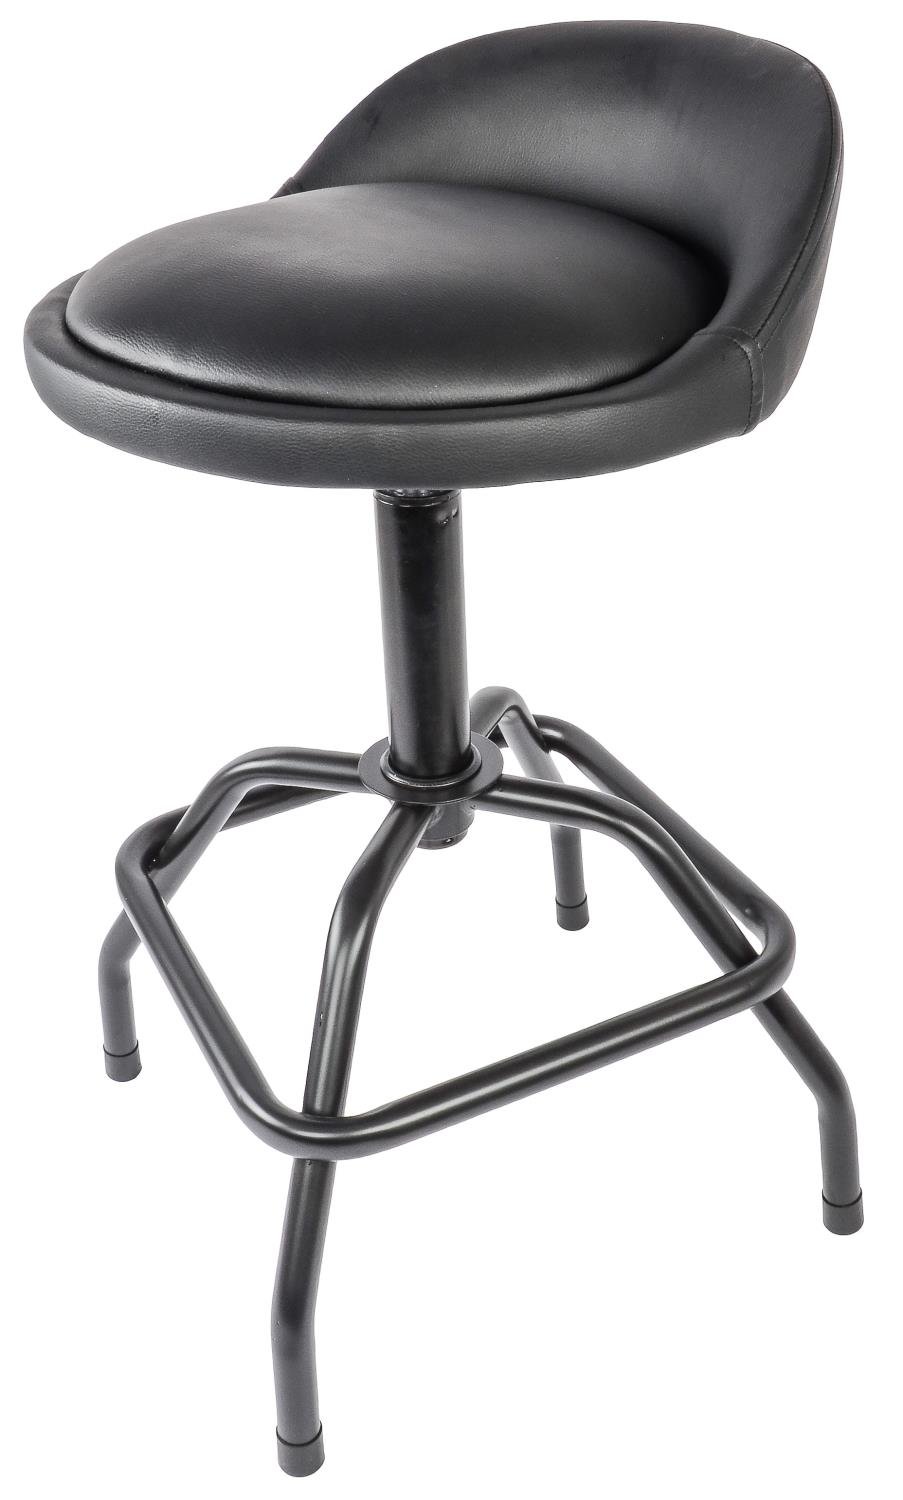 Pneumatic Swivel Stool Adjustable from 26 in. to 32 in. [330 lb. Weight Capacity]